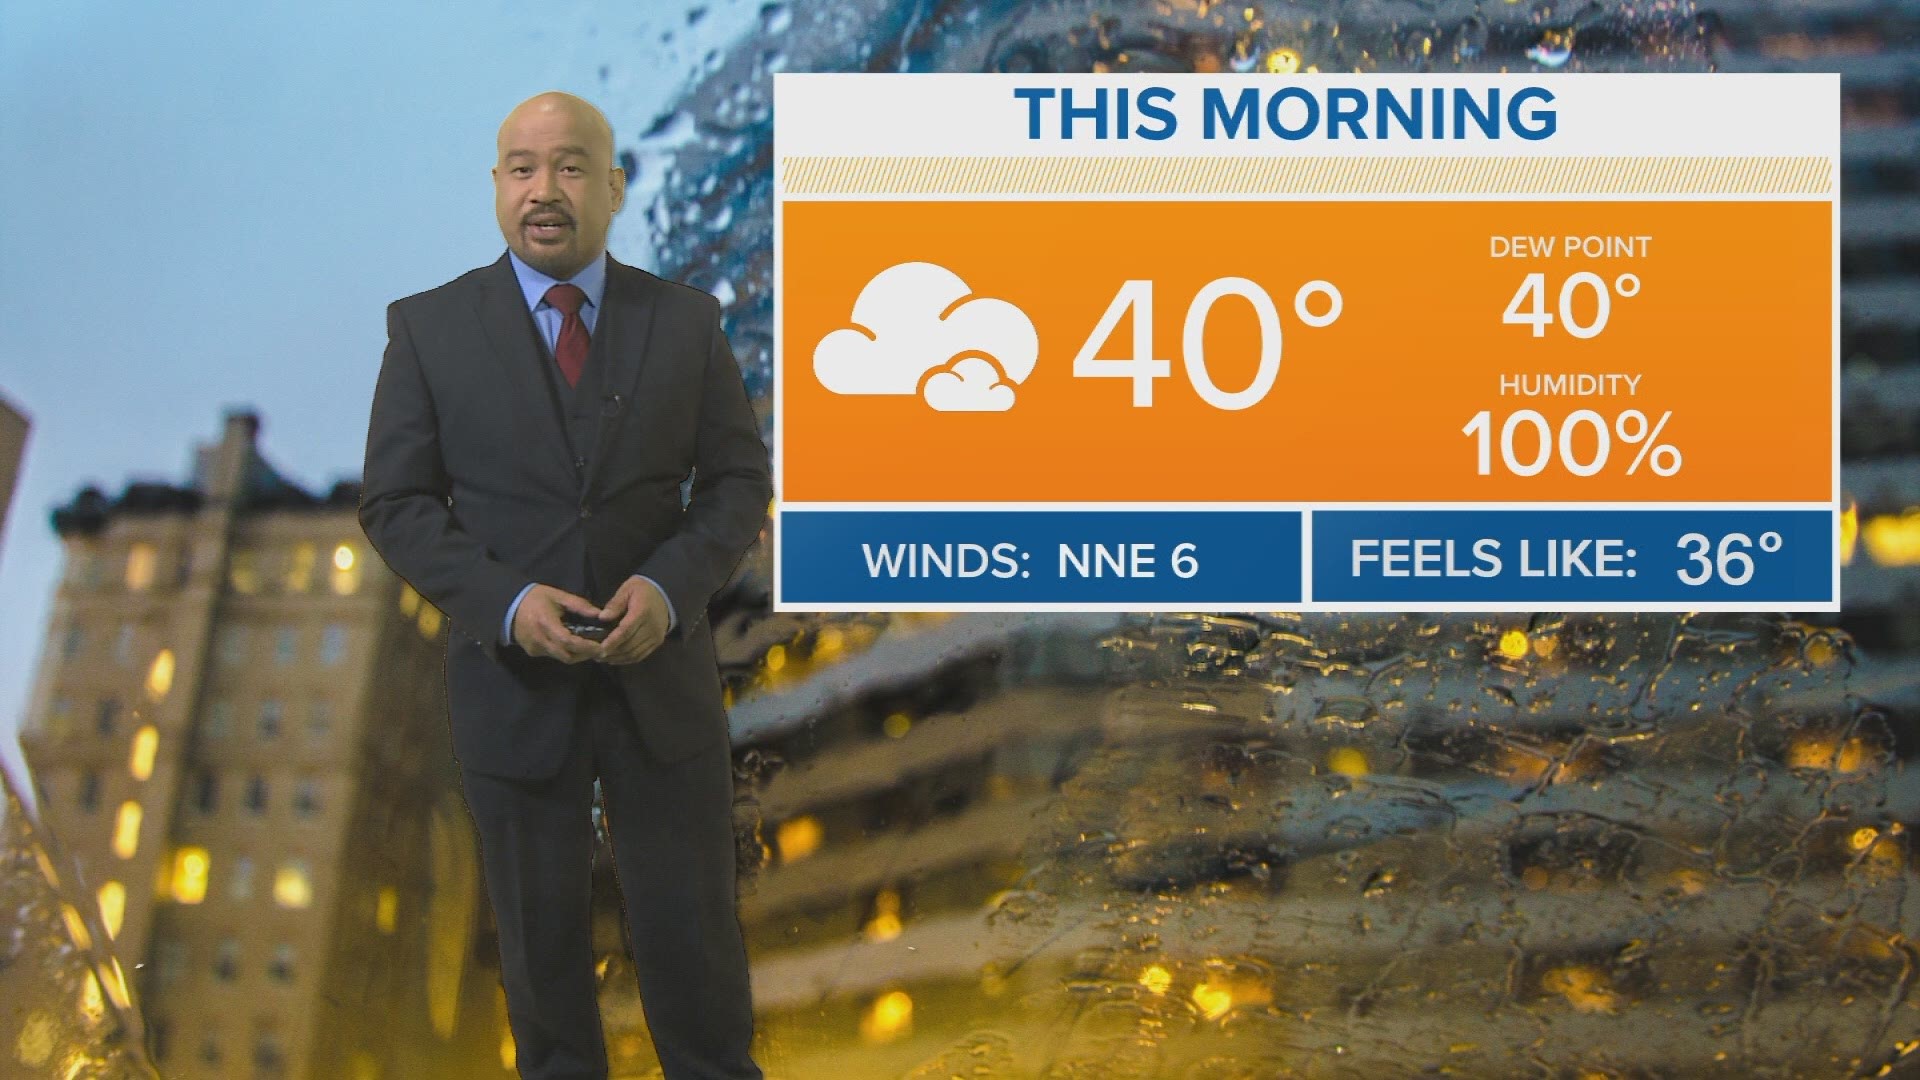 News19 Meteorologist Efren Afante provides the forecast for the Midlands of South Carolina on February 20, 2019.